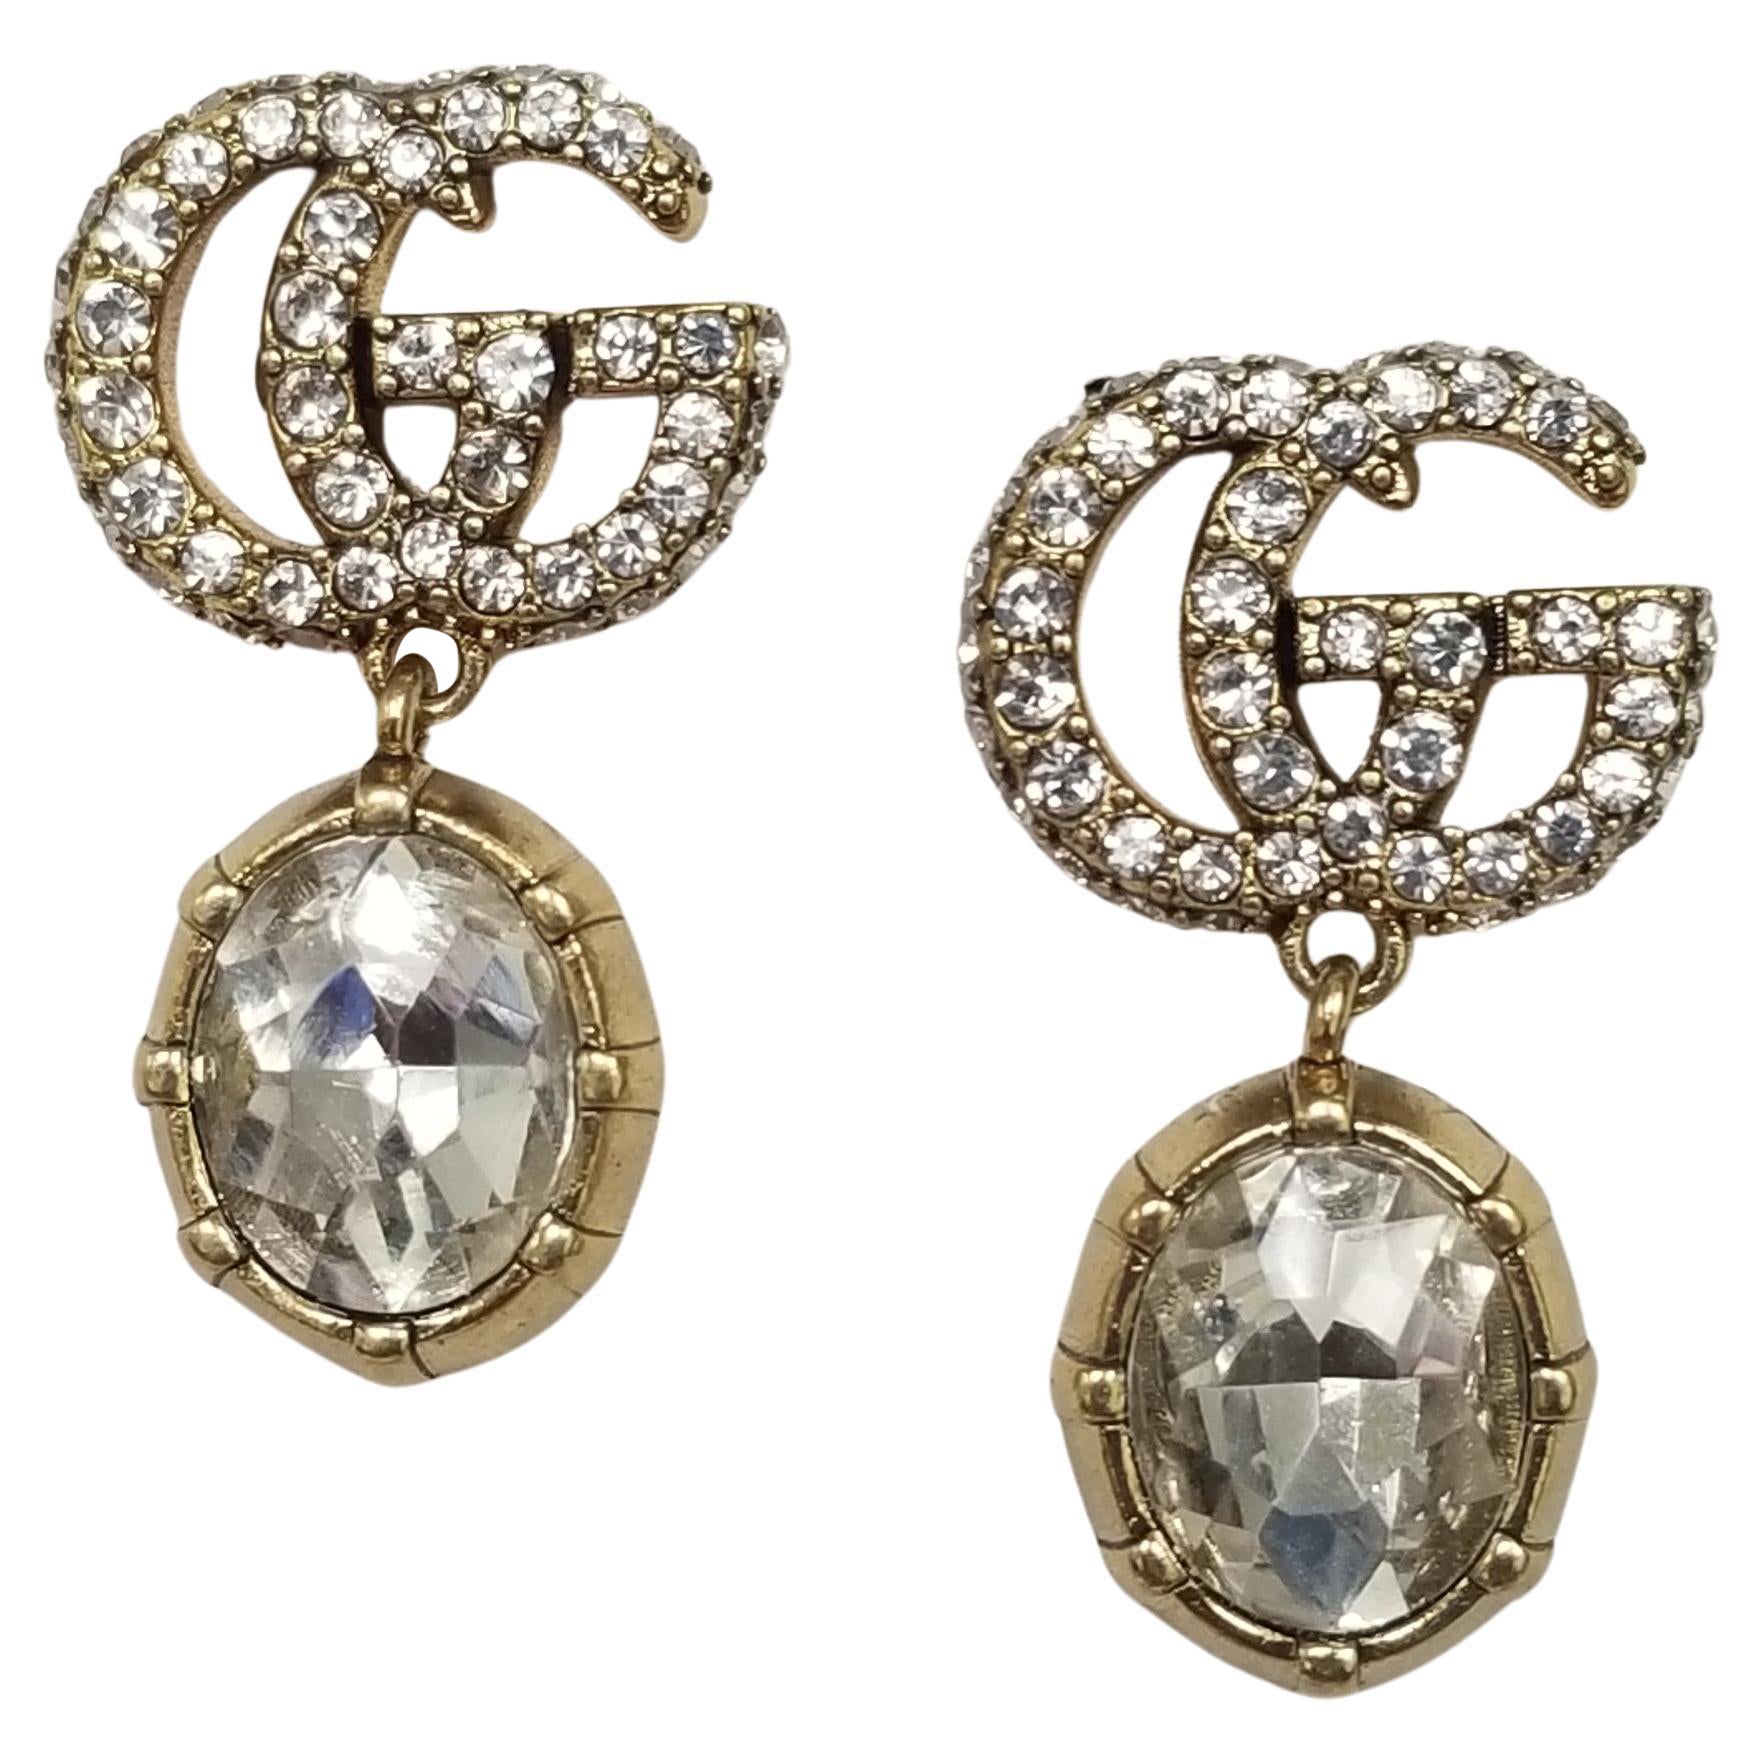 Gucci "GG" Logo in Crystals with Dangling White Faceted Crystal Earrings